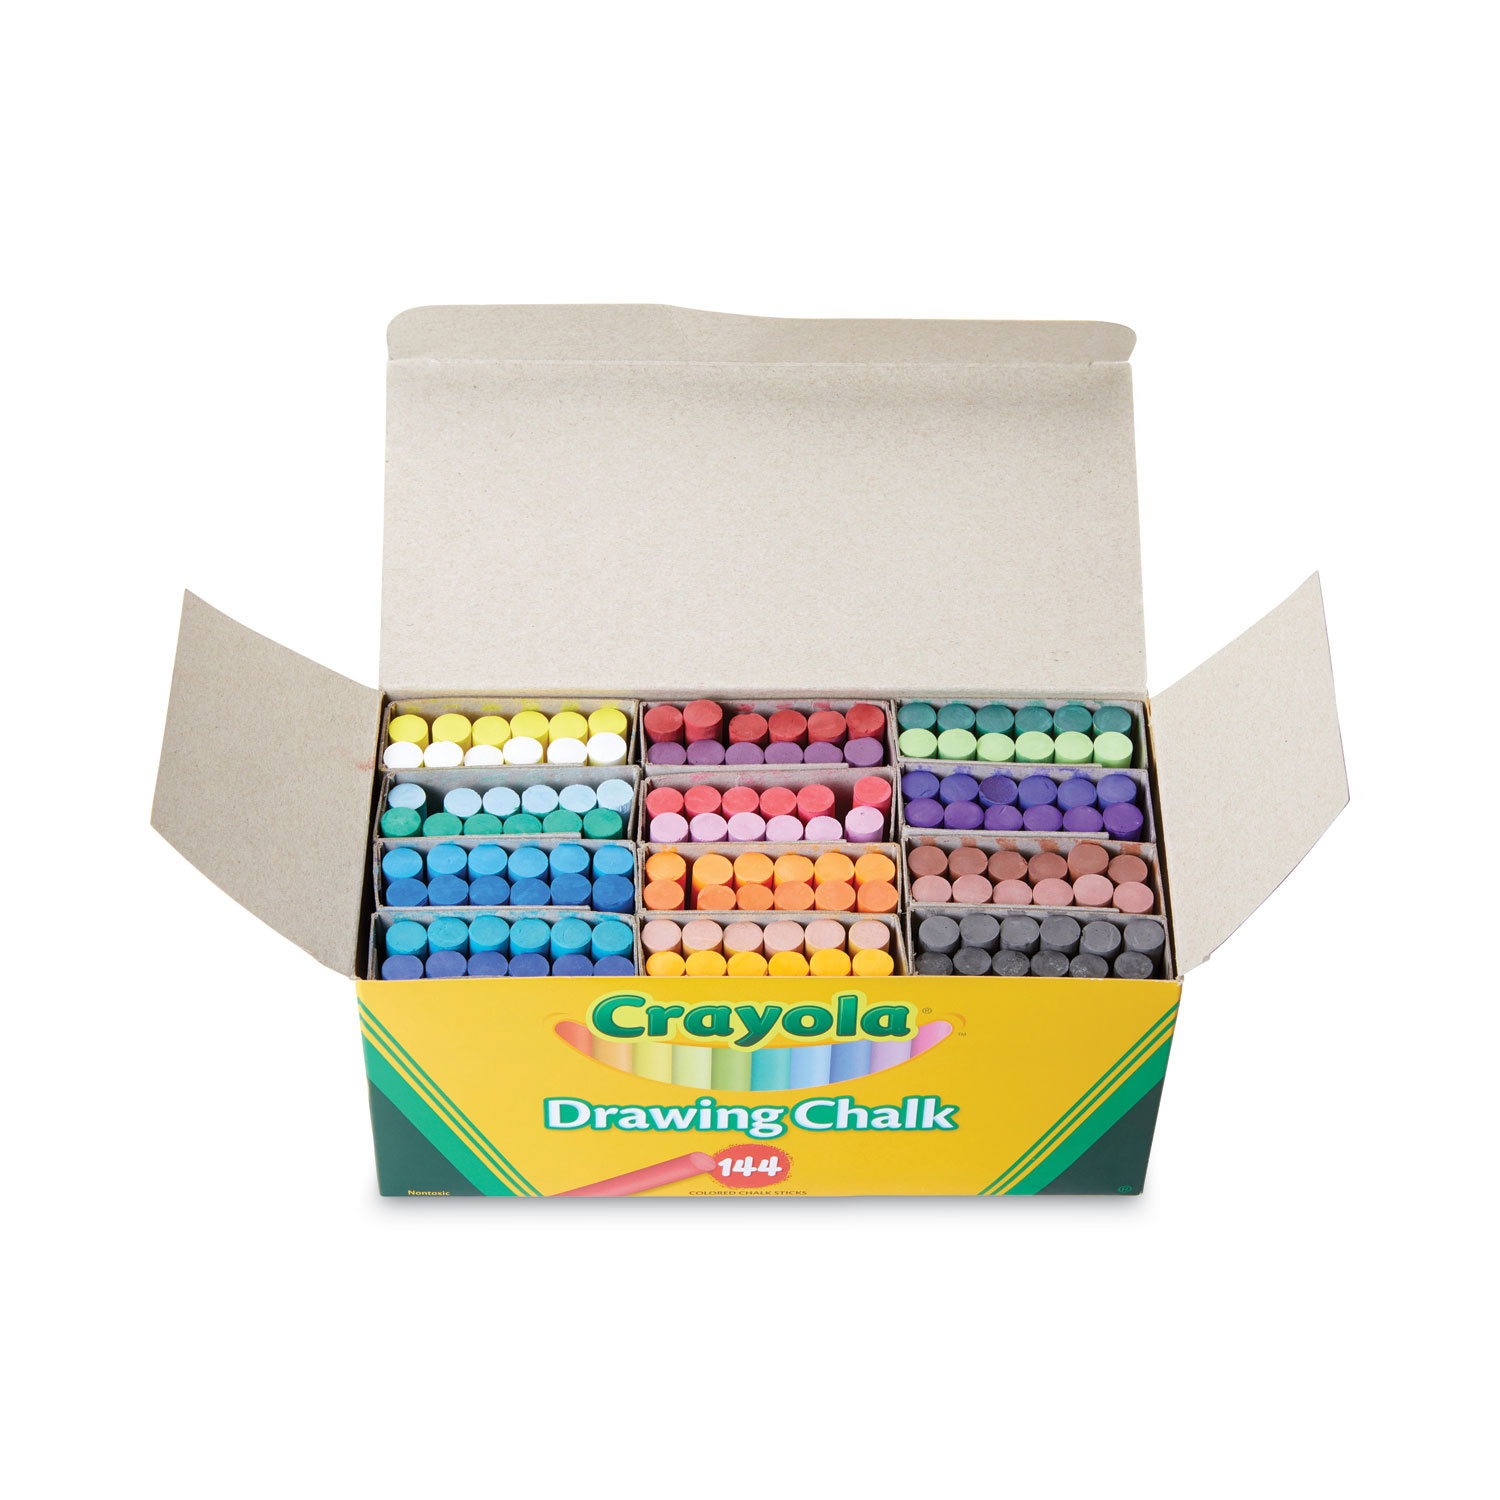 Crayola Crayons 24 In A Box (Pack of 6) 144 Crayons in total